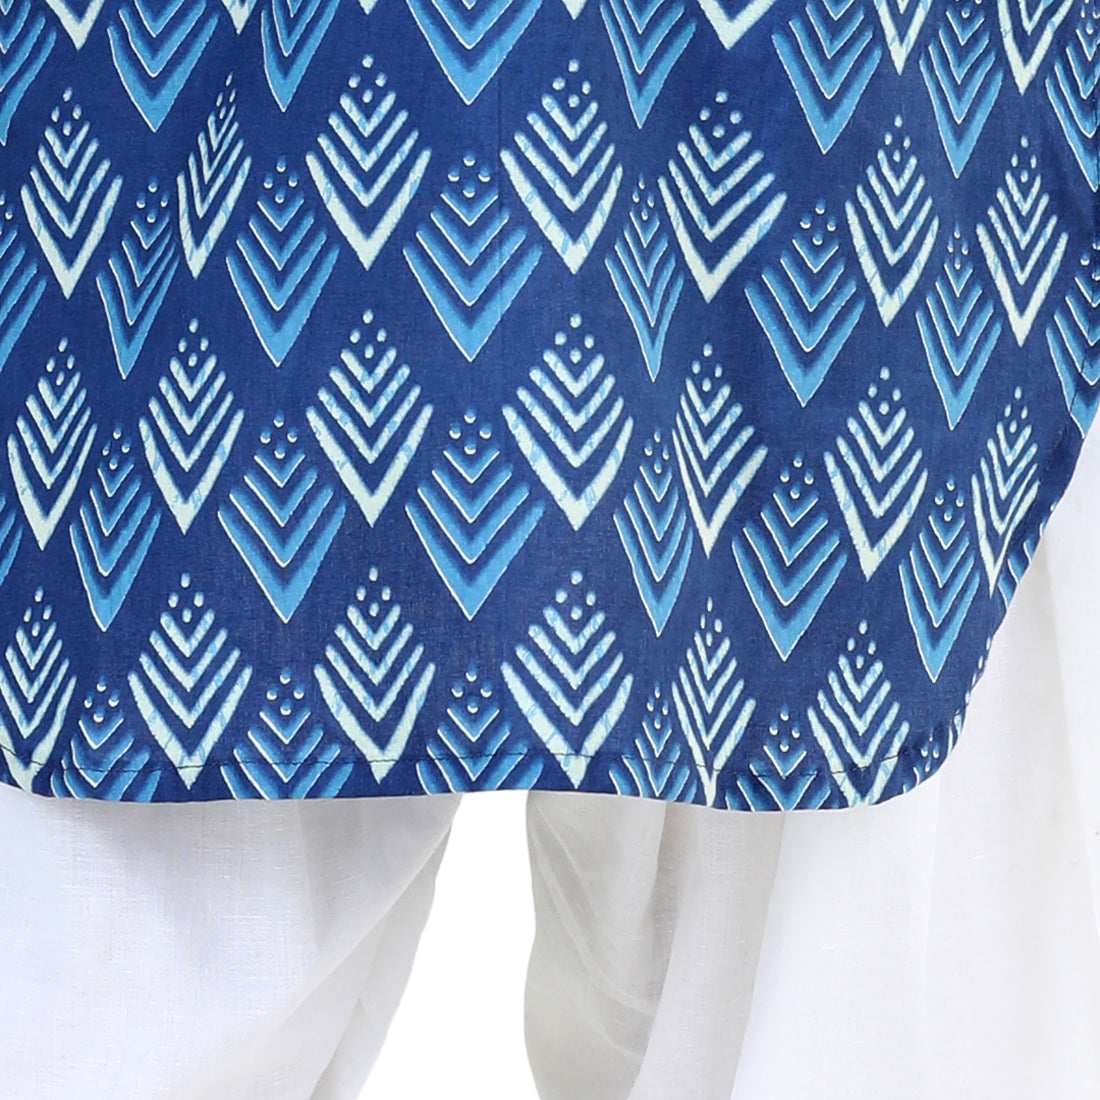 Printed Cotton Full Sleeve Pathani Salwar Set for Boys- Blue NOZ2TOZ - Made In INDIA.